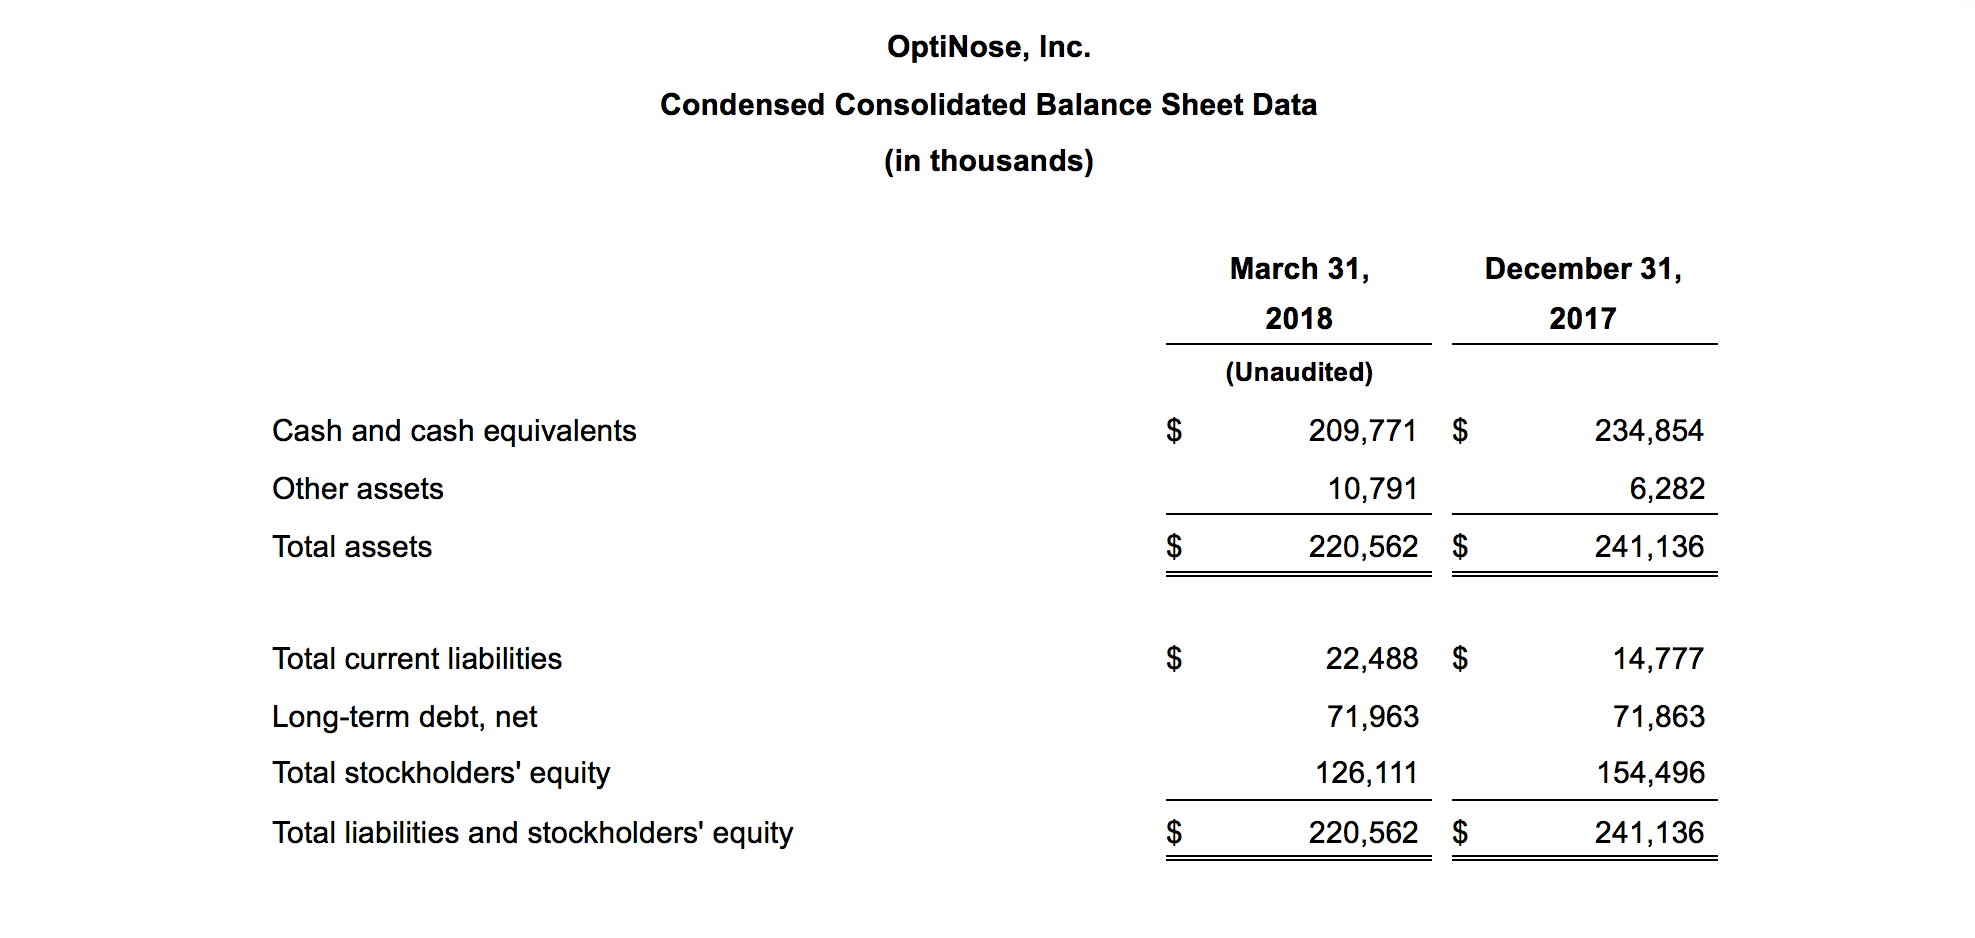 OptiNose, Inc. Condensed Consolidated Balance Sheet Data (in thousands)